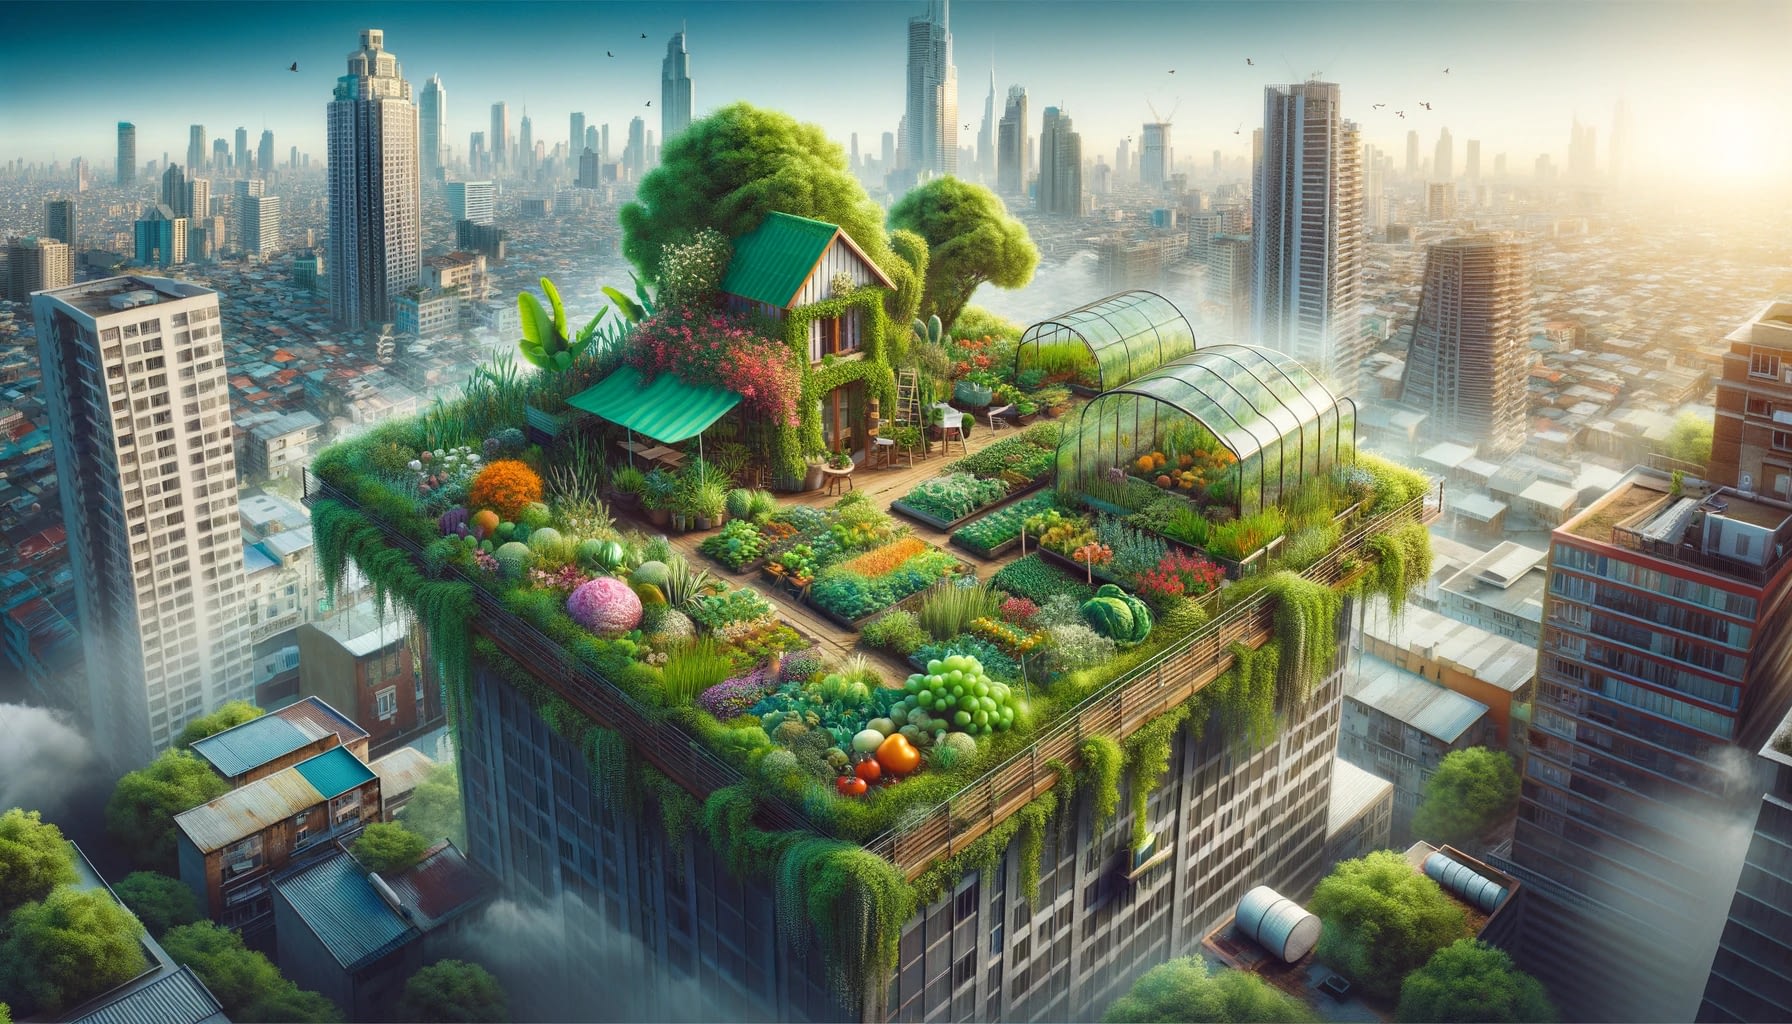 Dall&Middot;E 2024 03 01 18.42.22 A Whimsical Yet Realistic Image Of A Rooftop Garden In An Urban Setting. The Scene Depicts A Vibrant And Green Rooftop Filled With A Variety 1200 Px By 628 -